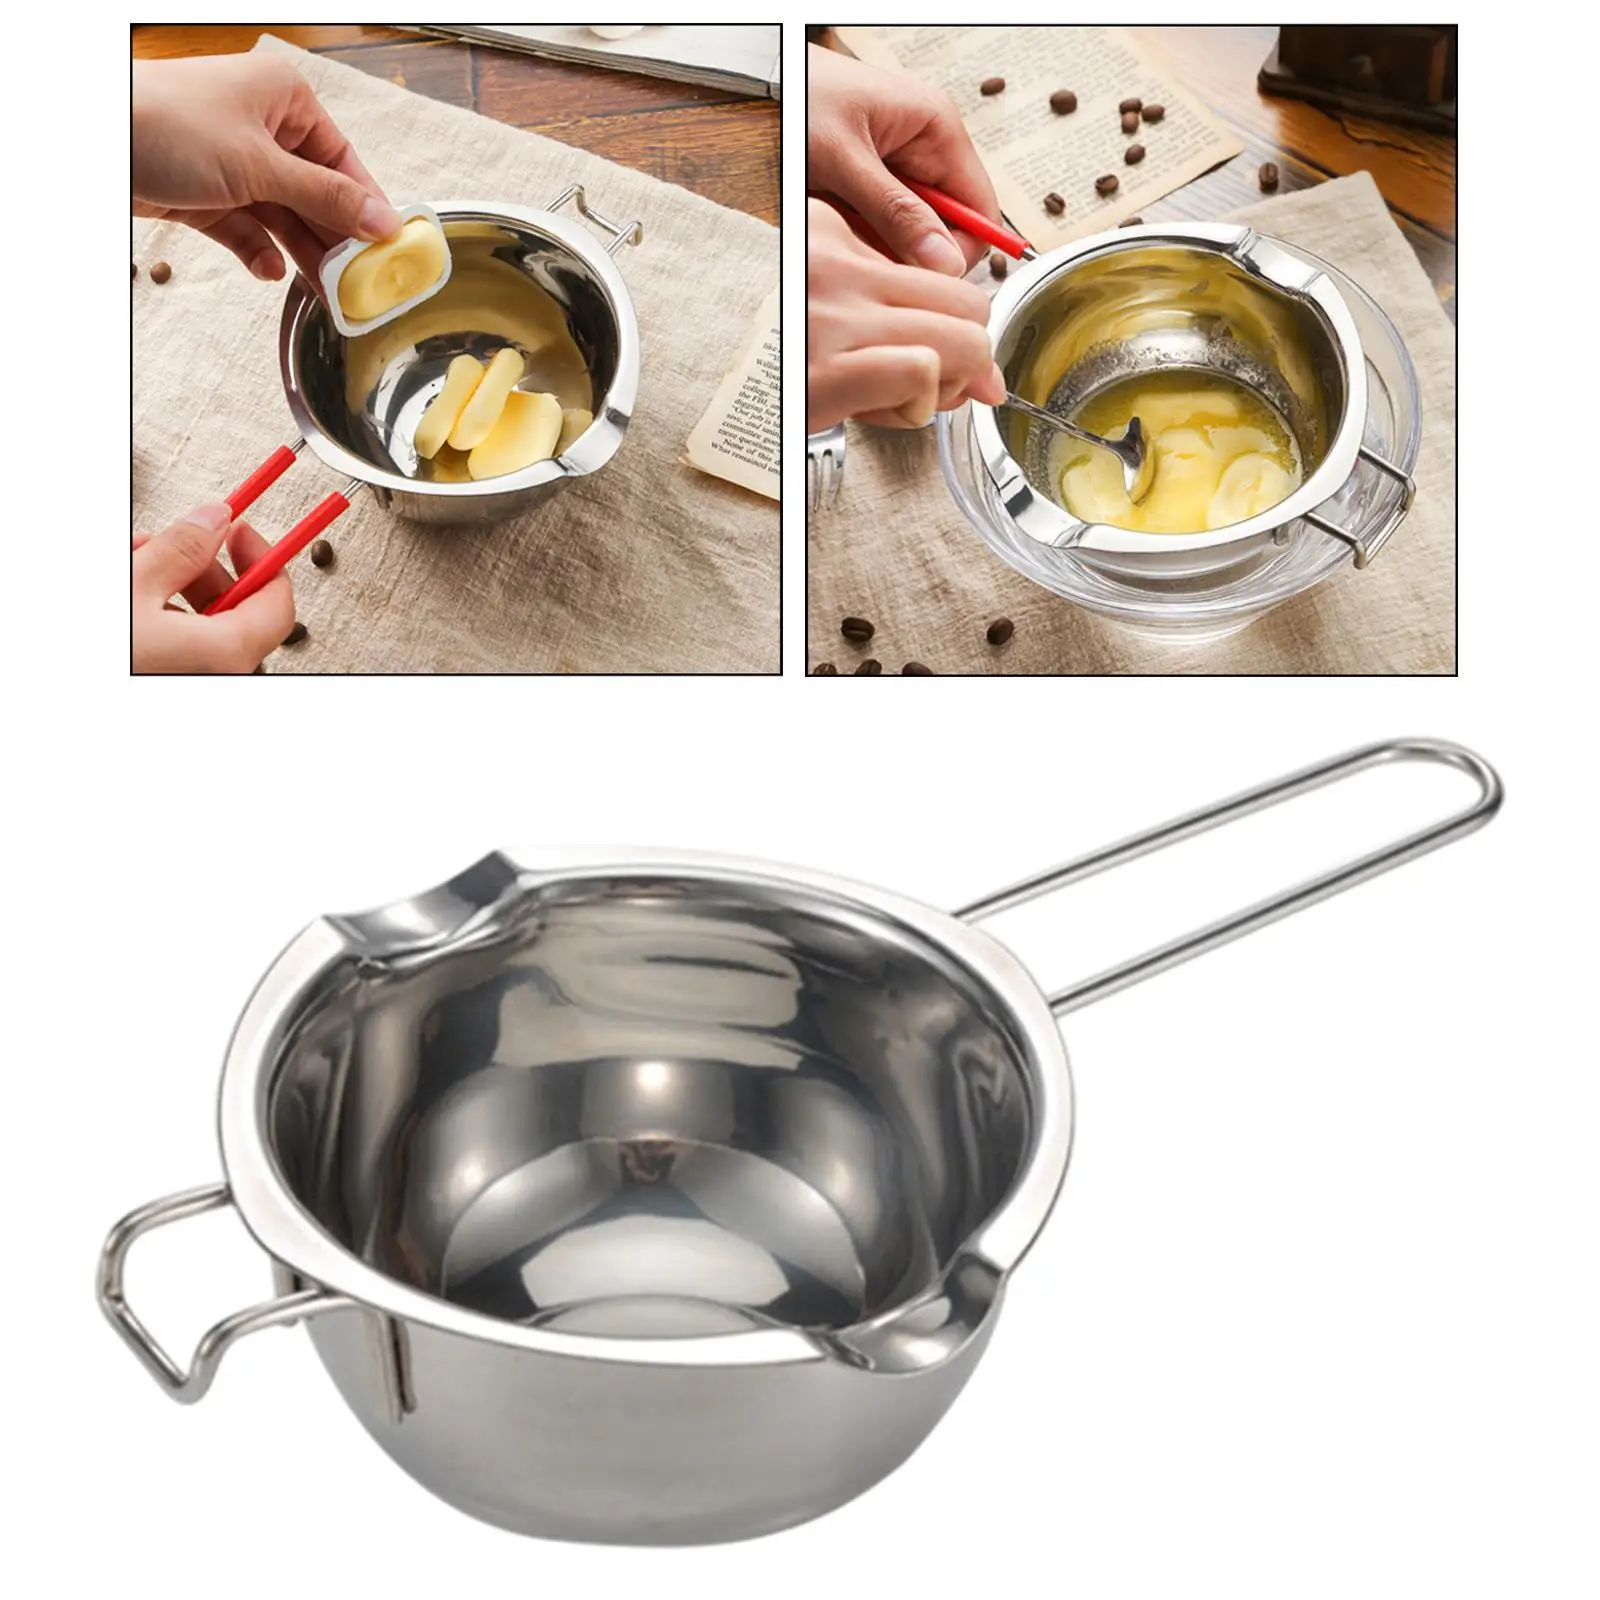 Stainless Steel Double Boiler Metls Pot 600ml for Melting Chocolate Sturdy